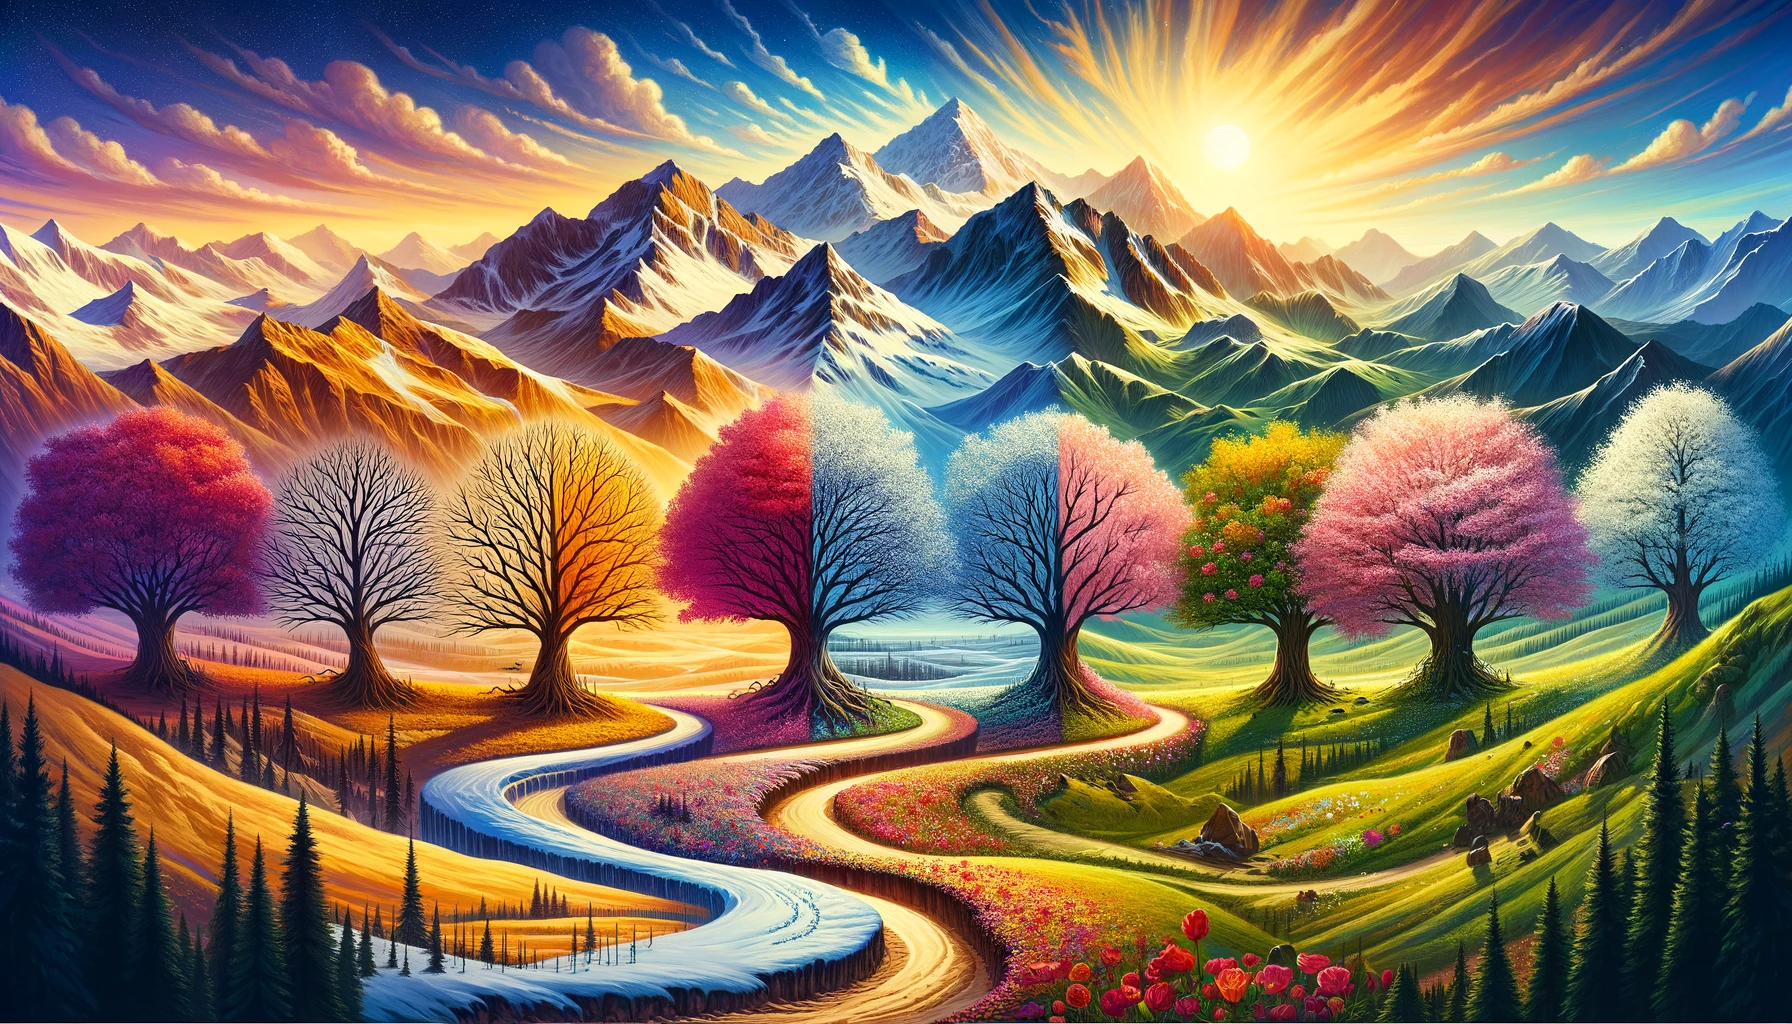 Visualize the concept of 'The Process' in recovery, depicting it as a journey through different seasons, representing the stages of healing and growth